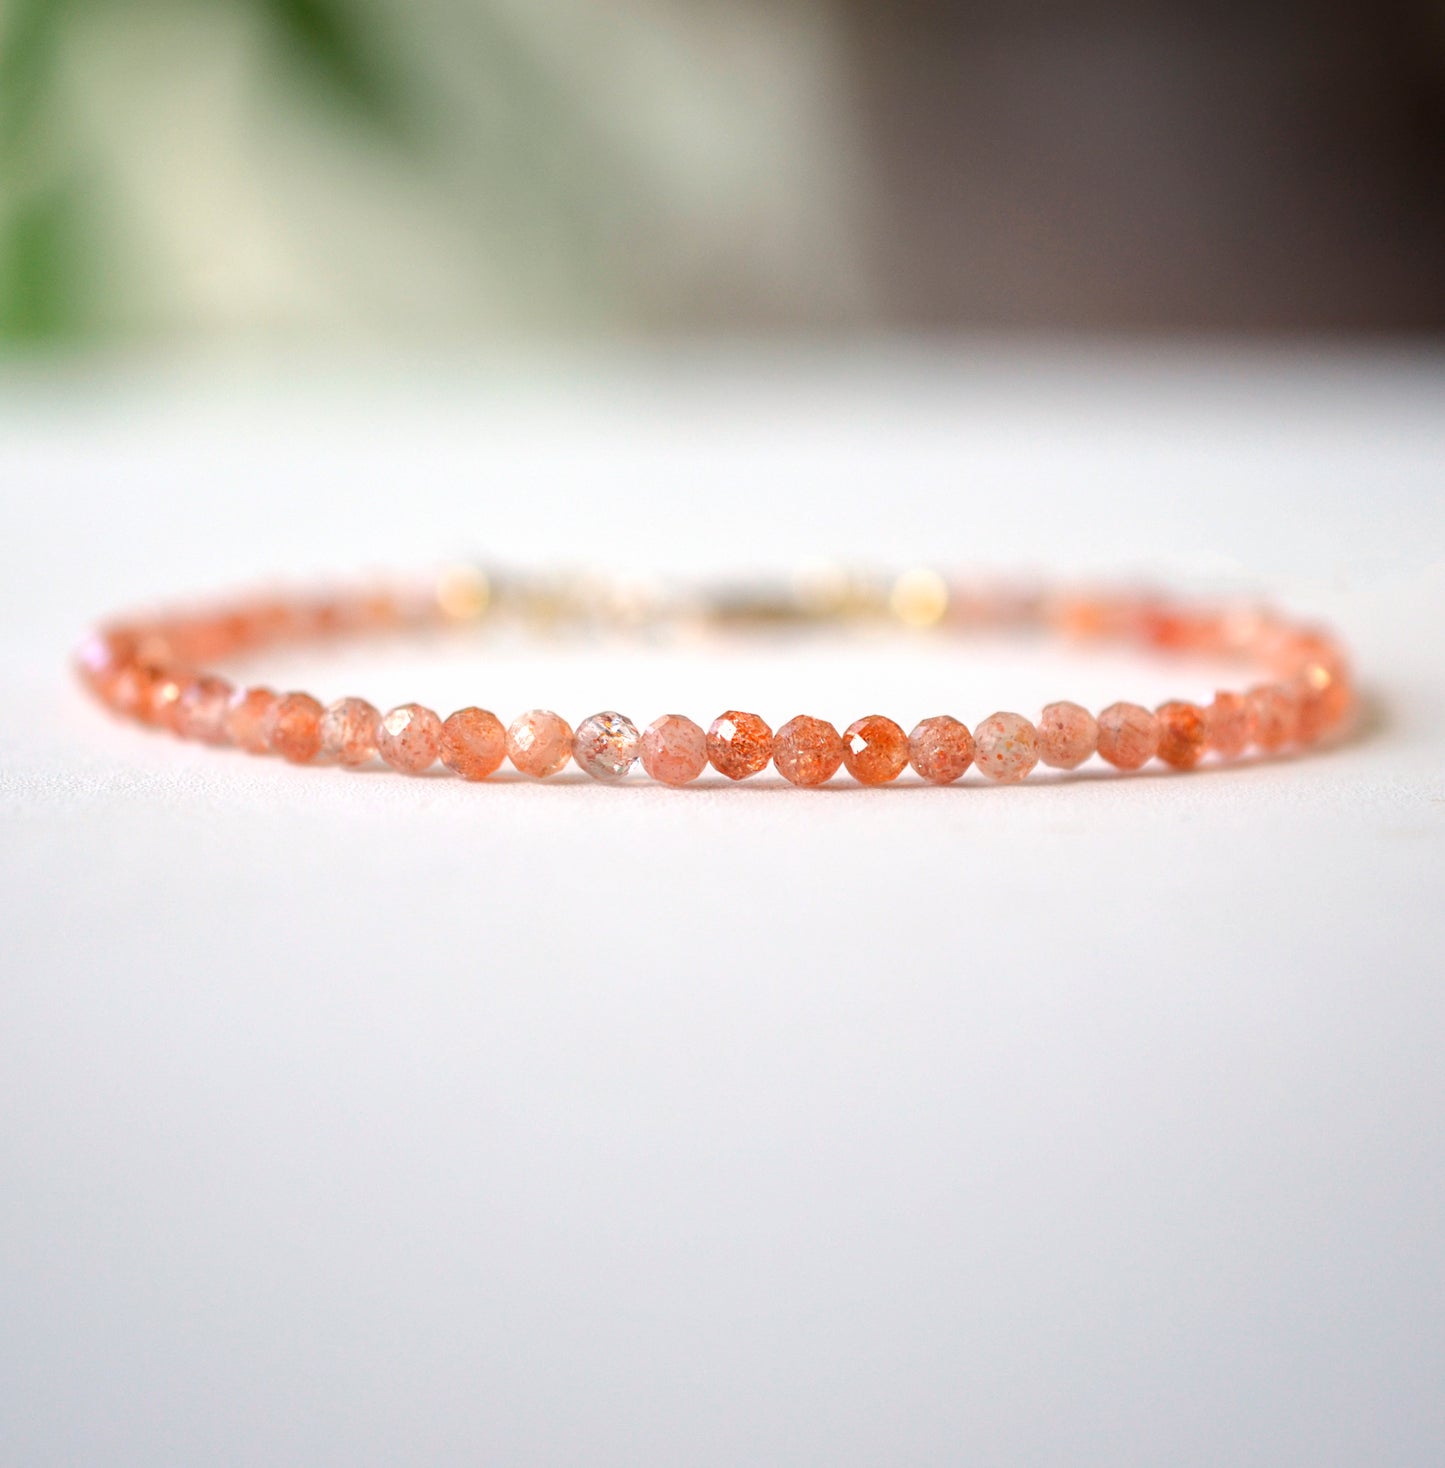 Dainty Sunstone beaded bracelet with orange to clear glittering gemstones. Clasp is sterling silver or gold filled. 